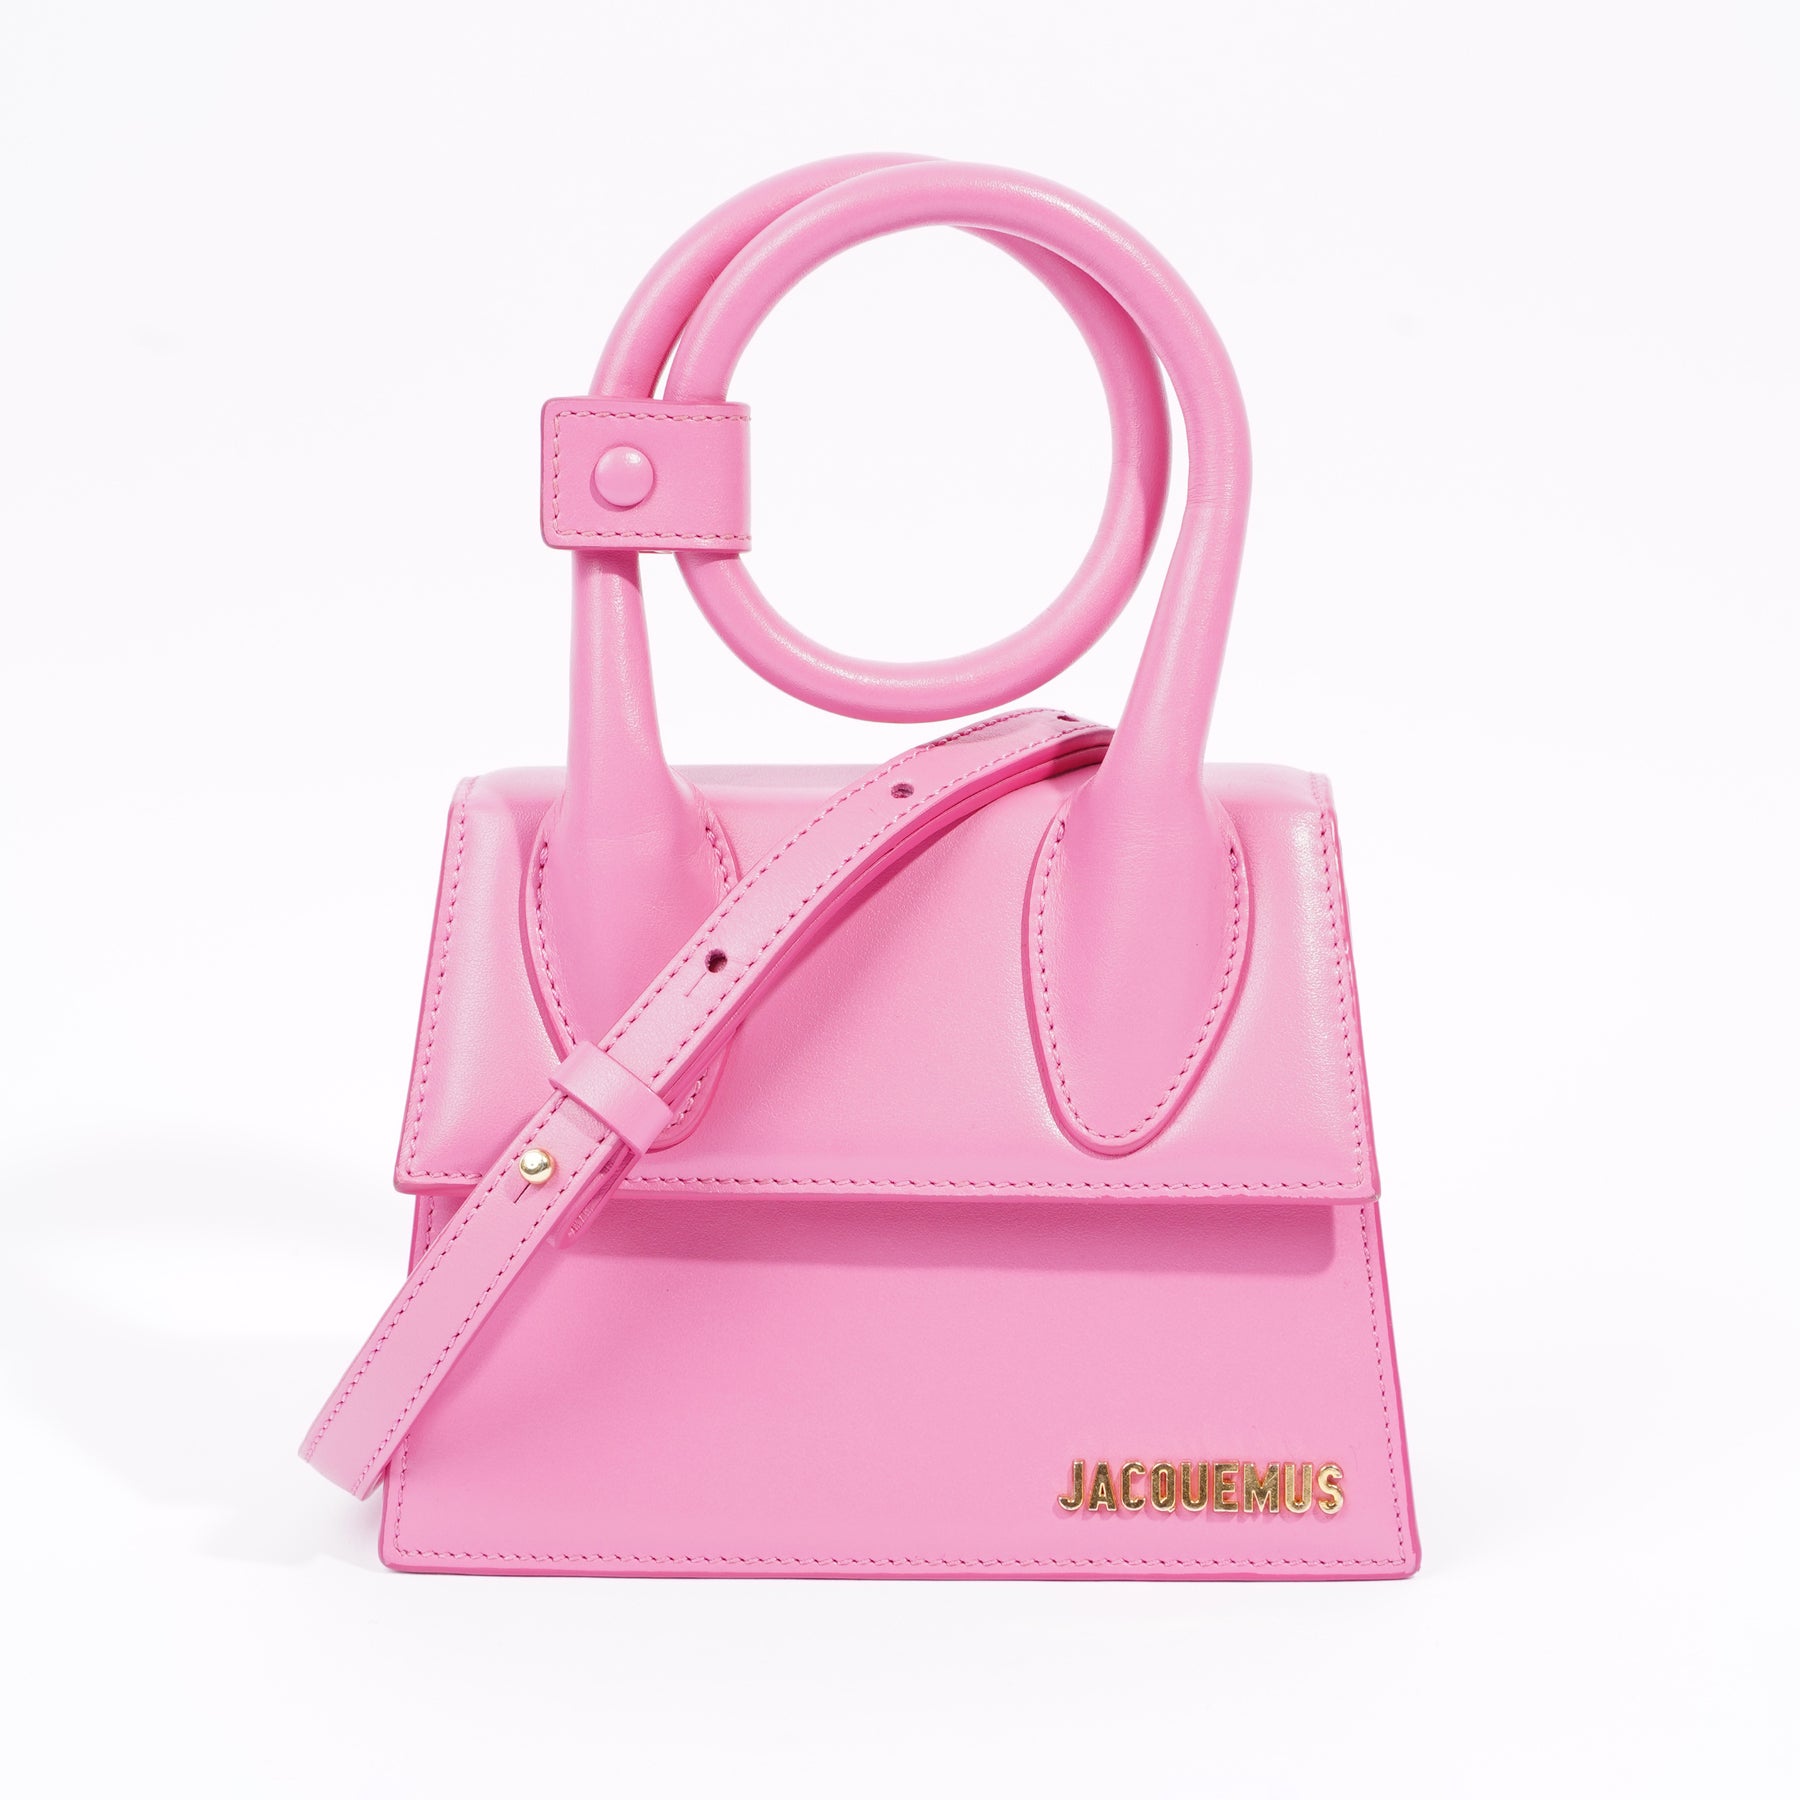 Jacquemus Le Chiquito Leather Mini Bag in Pink